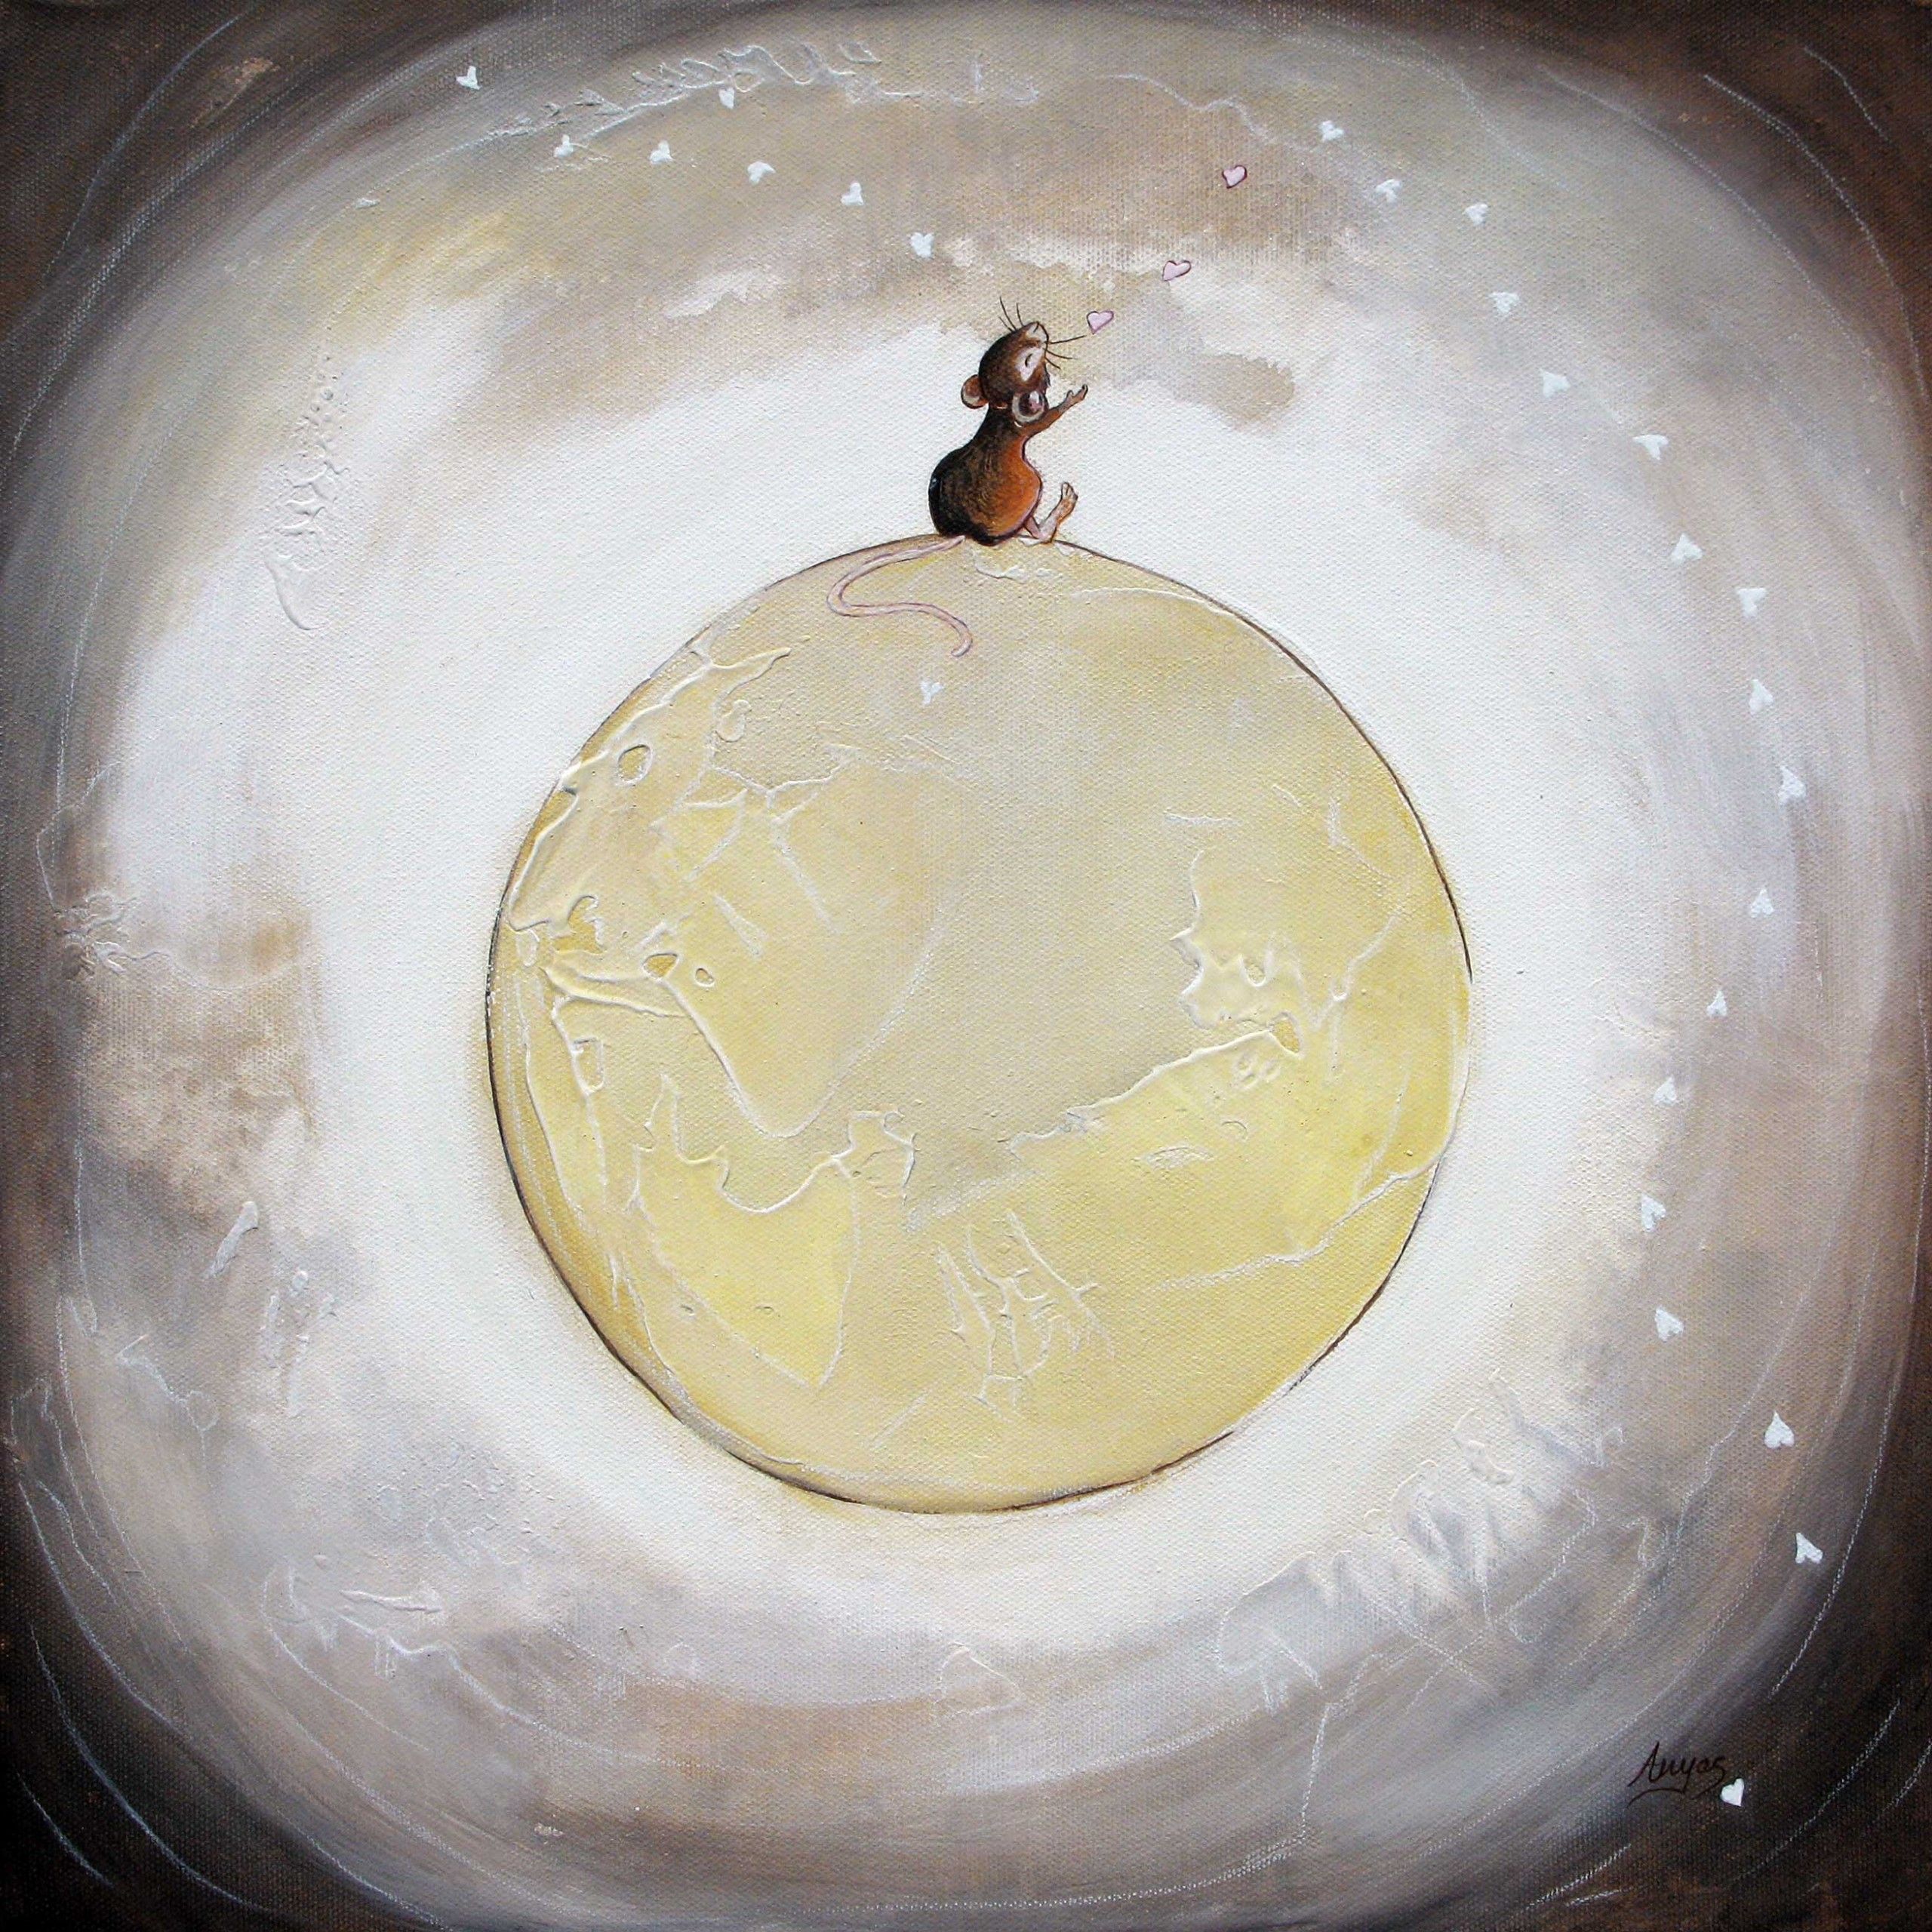 Over The Moon by Anya Simmons